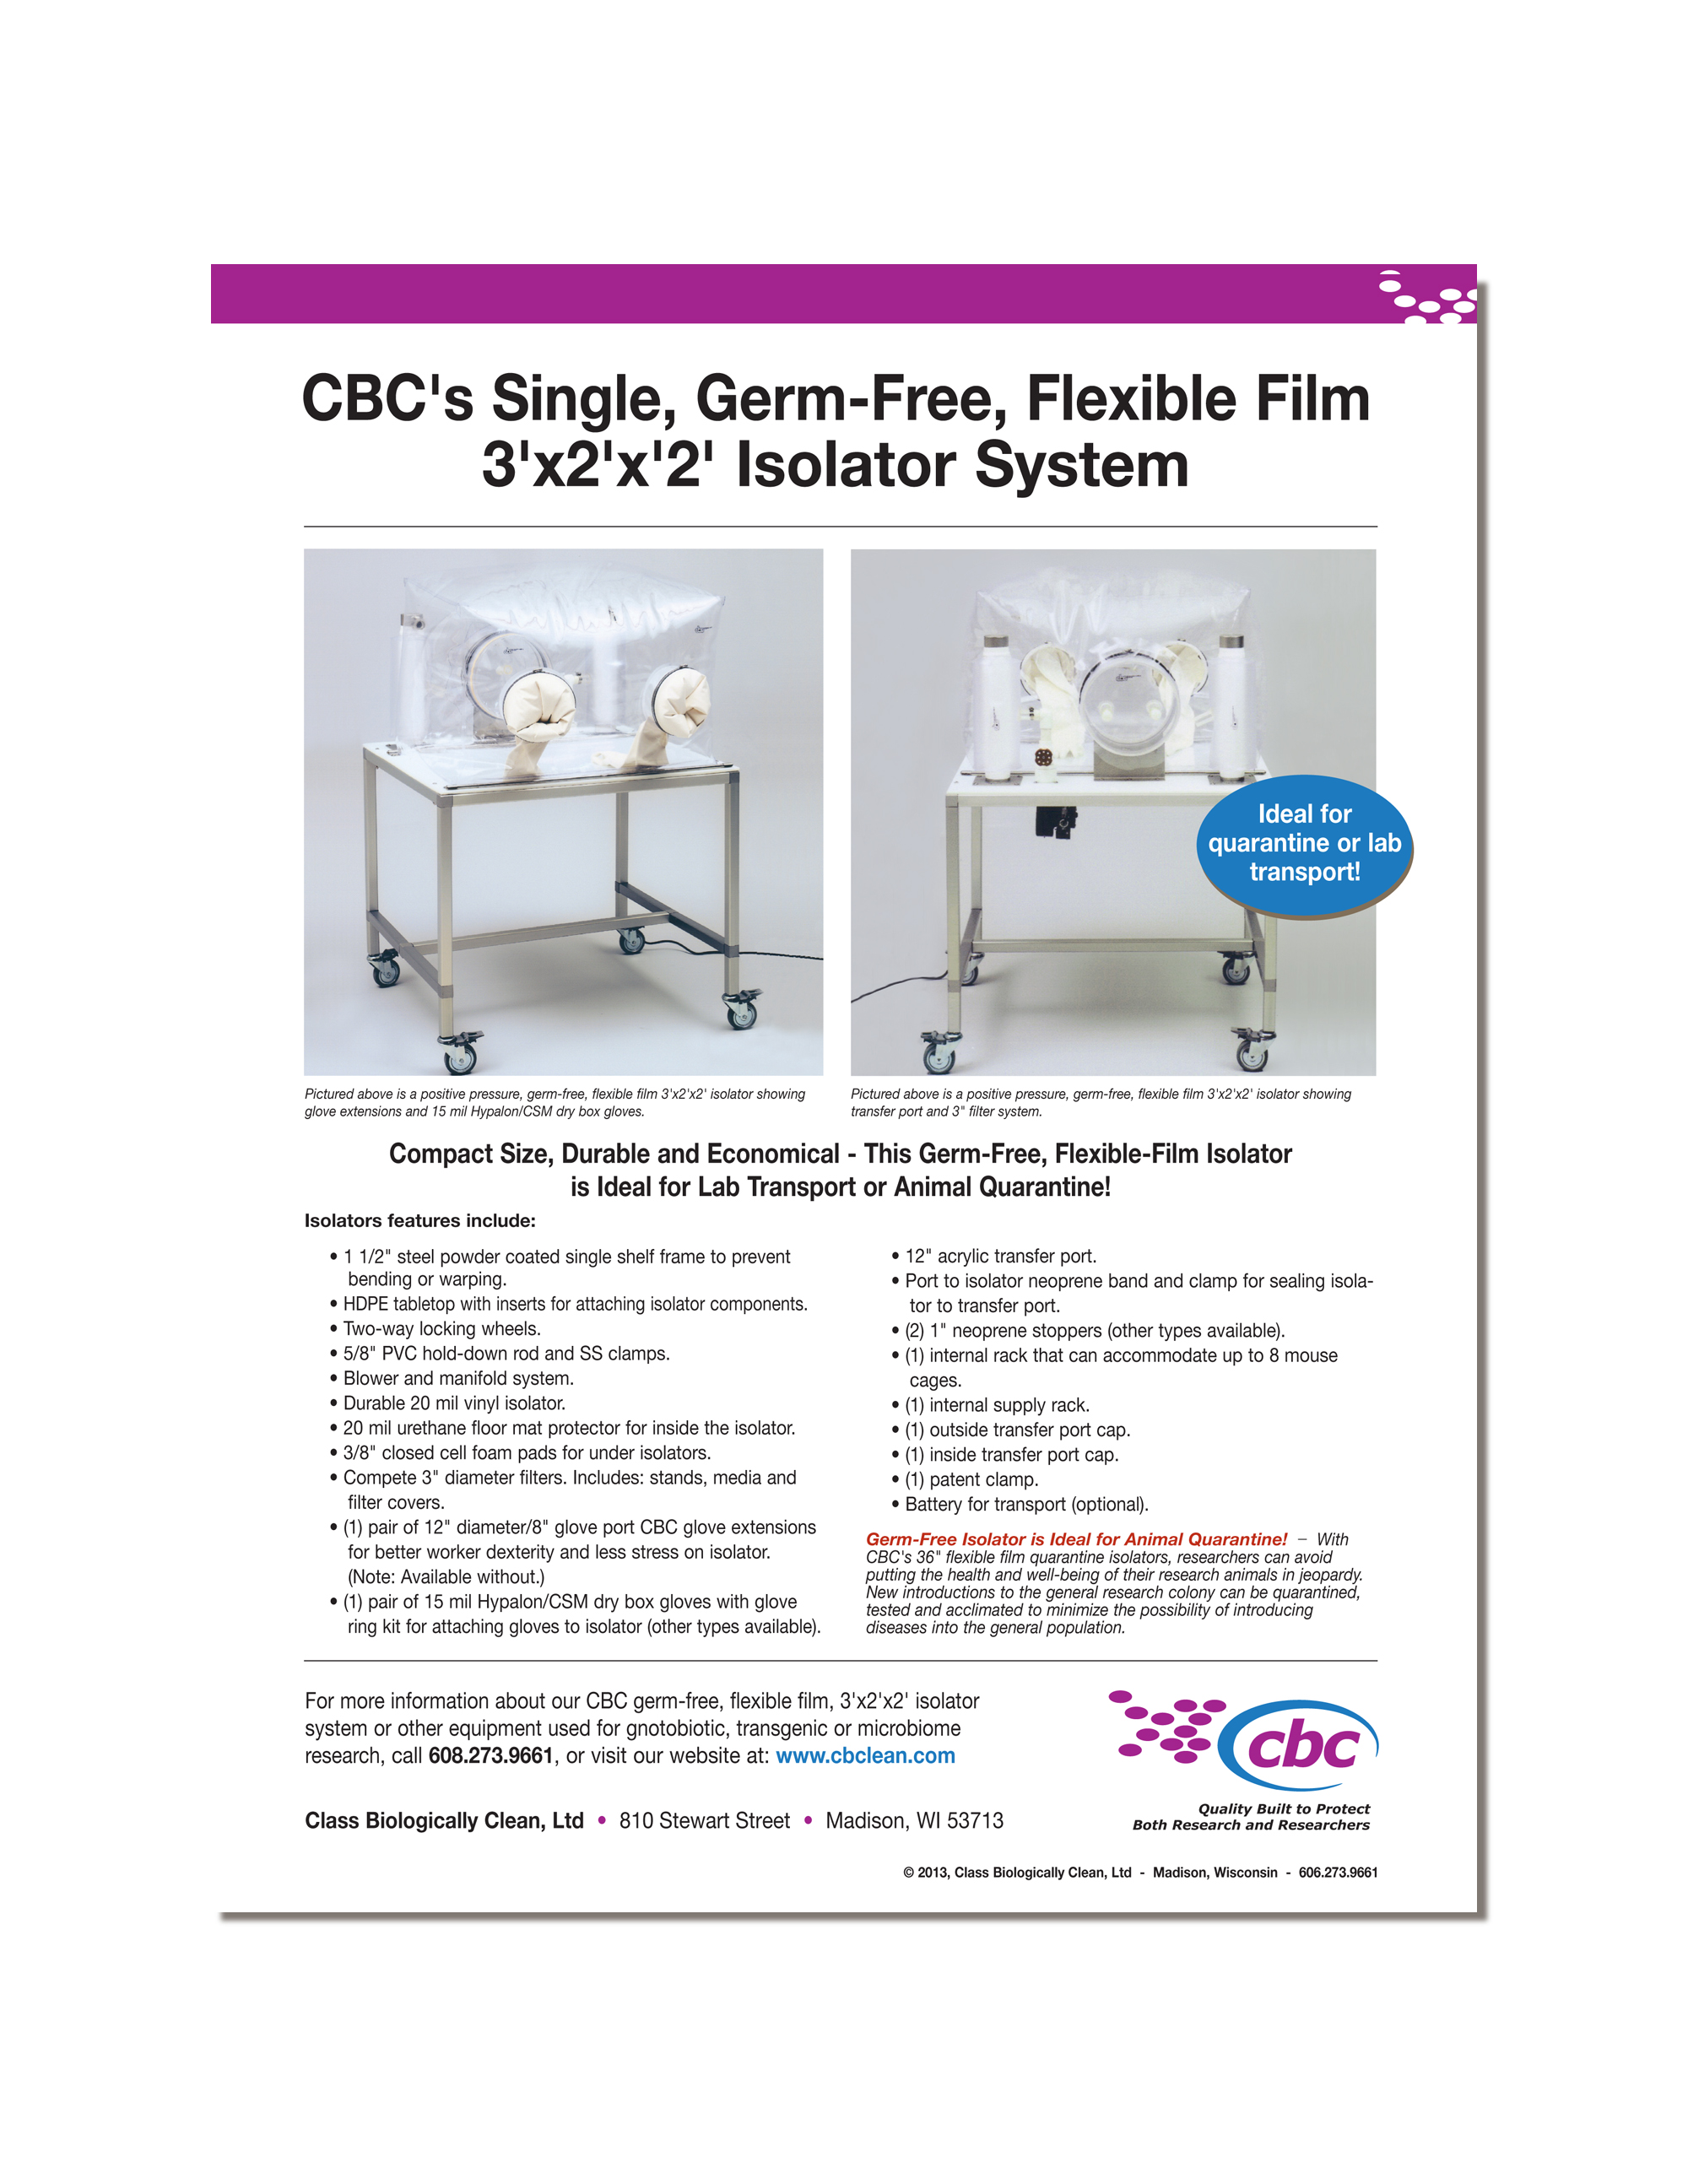 Download a printable flyer about CBC's positive pressure, flexible film Space Saver Isolators for labs with limited space and for transporting germ-free mice or other rodents within a lab or as a quarantine isolator so researchers can avoid putting the health and well-being of their research animals in jeopardy when adding new animals to the colony Click here to download flyer.